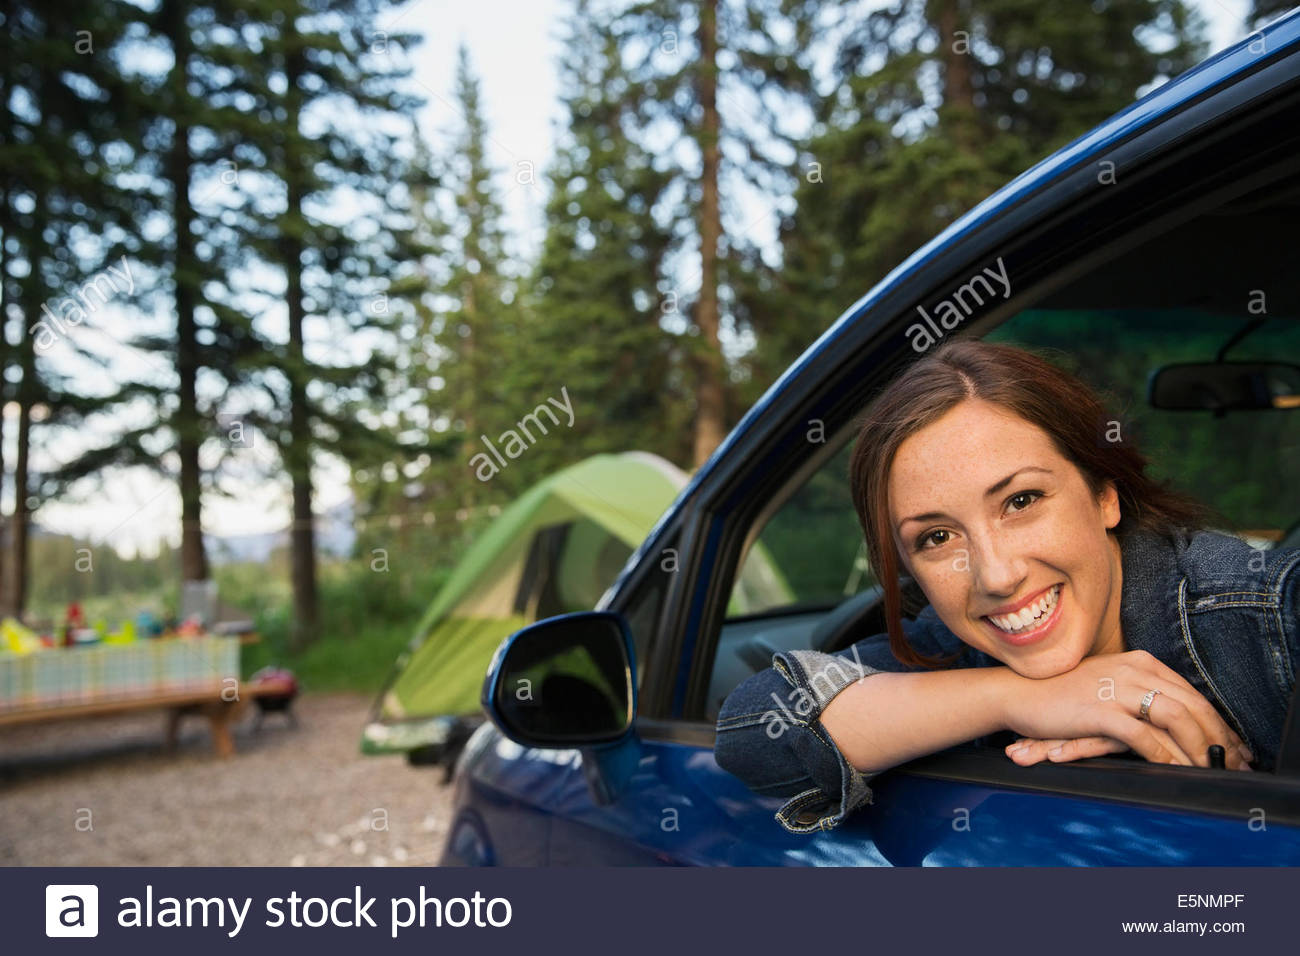 Smiling woman in car at campsite Stock Photo